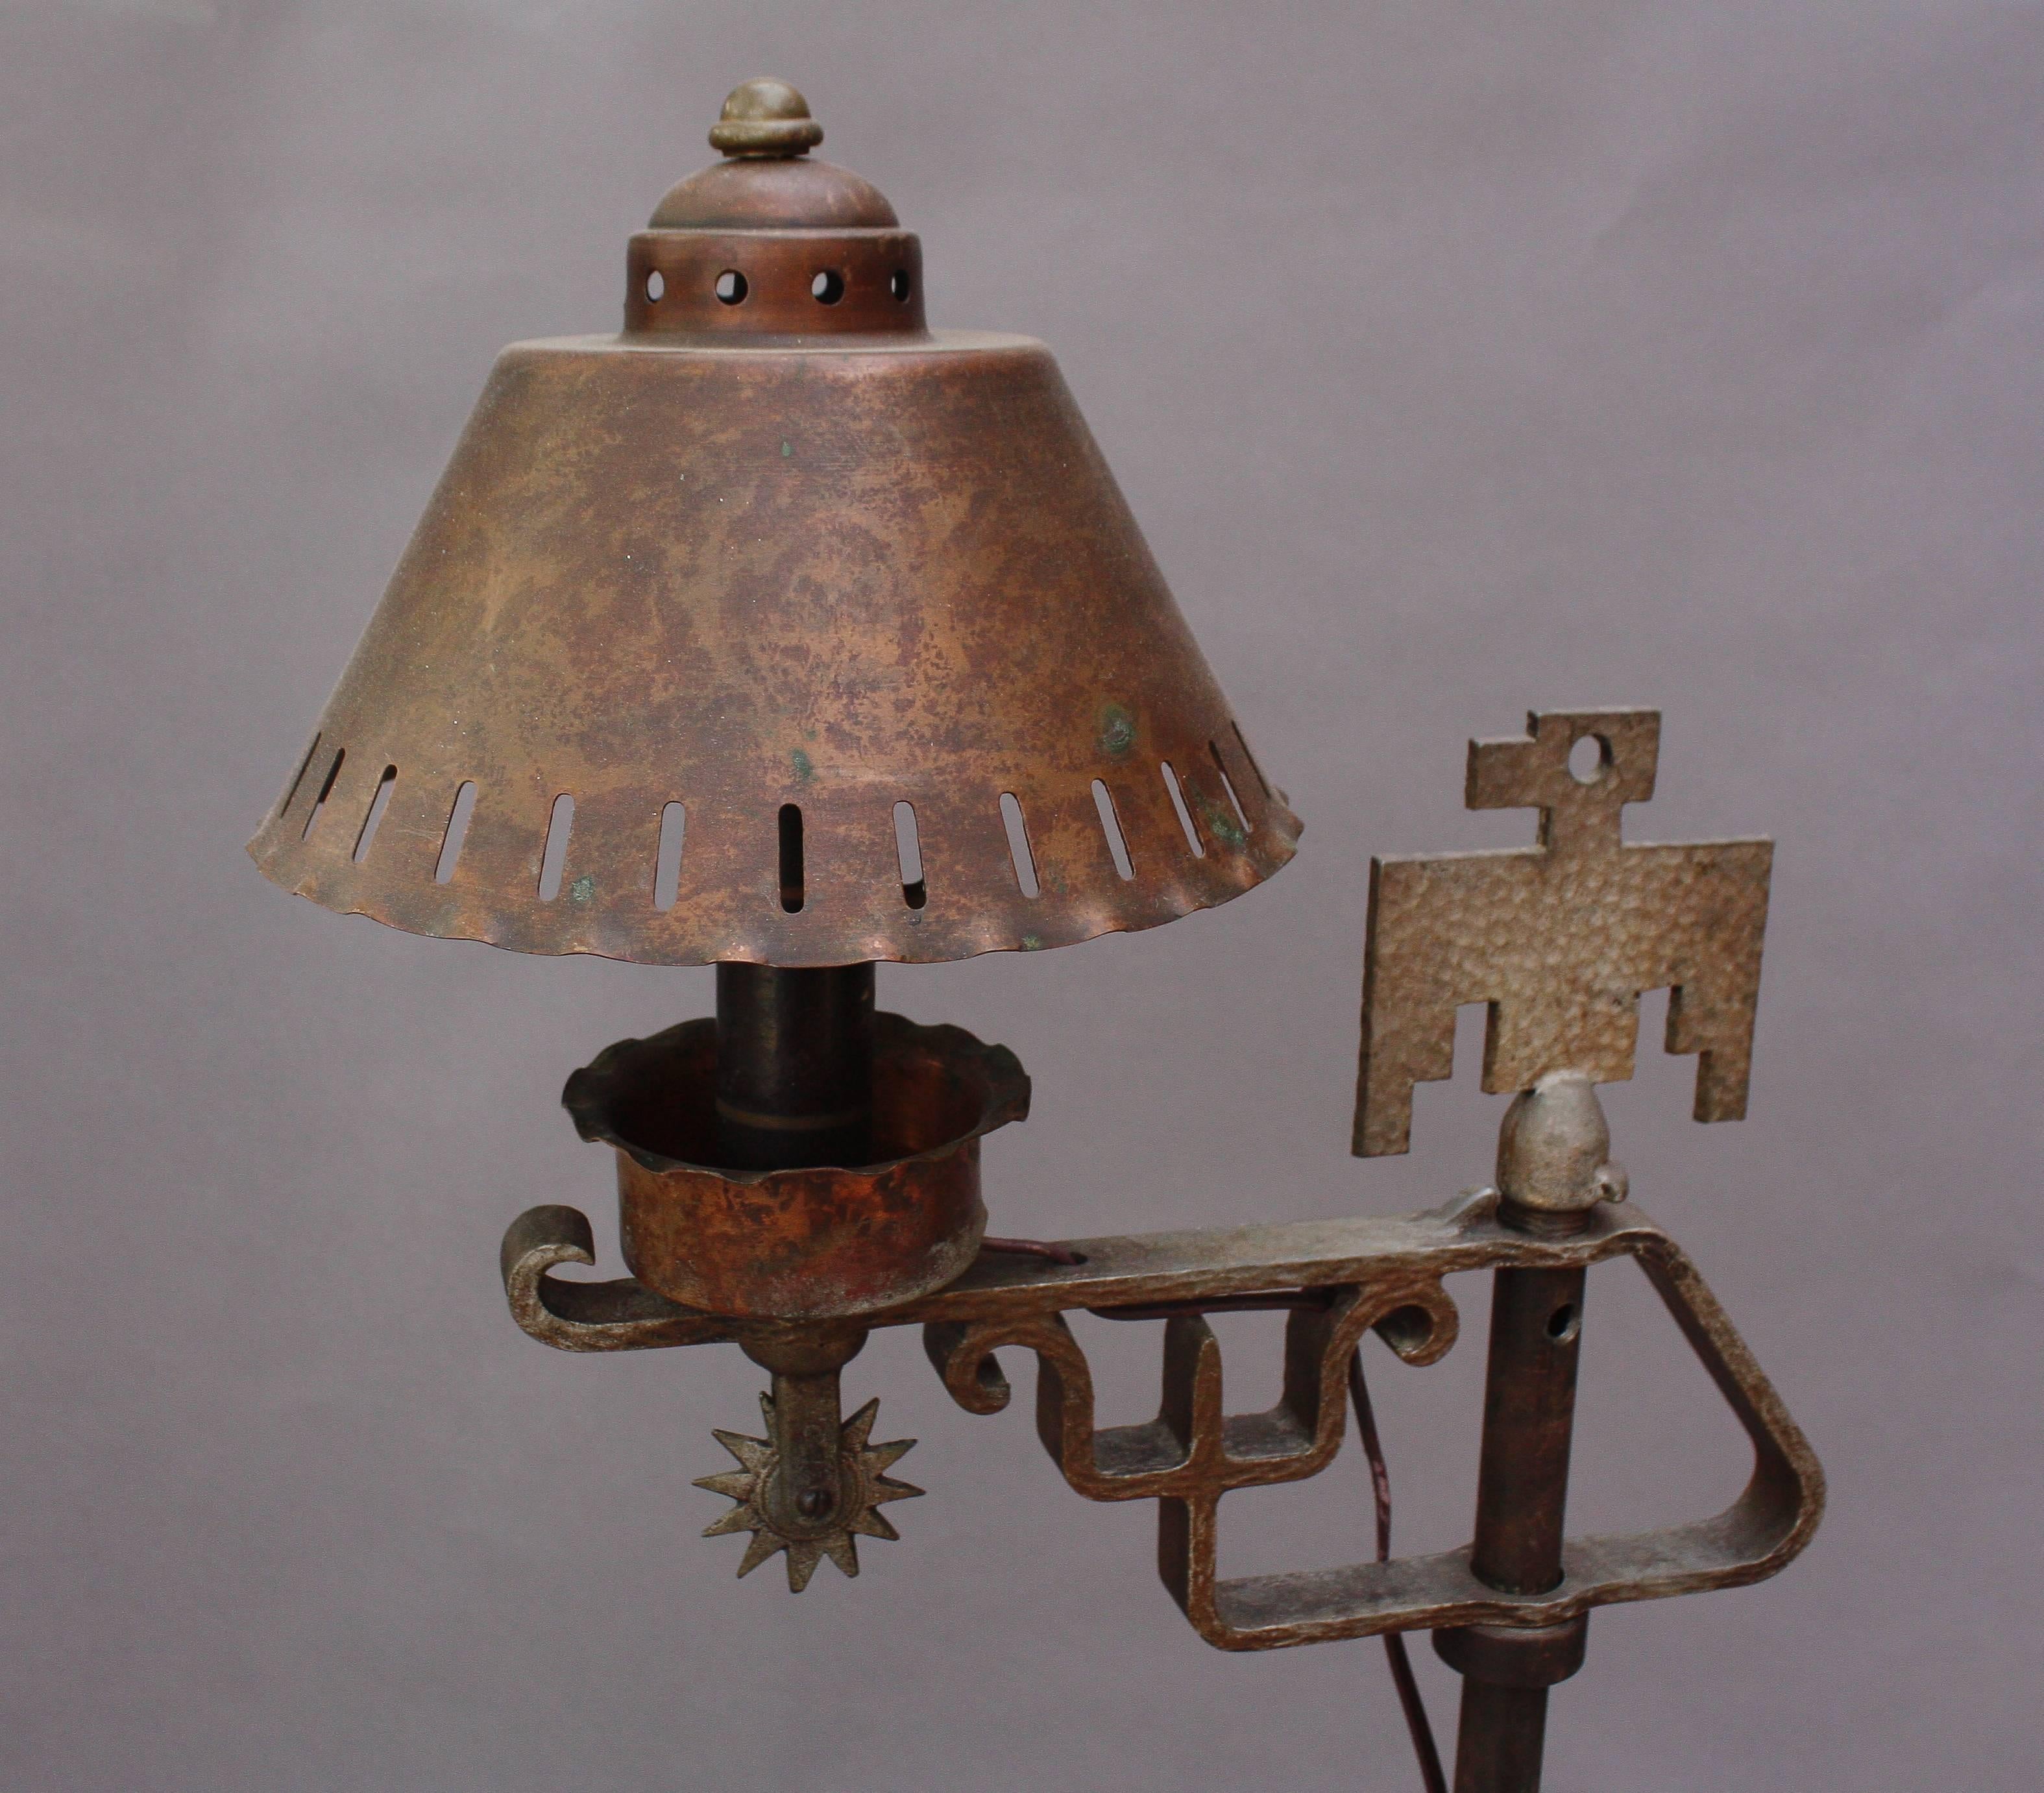 Hard to find 1930s floor lamp with thunderbird and horseshoe motif.